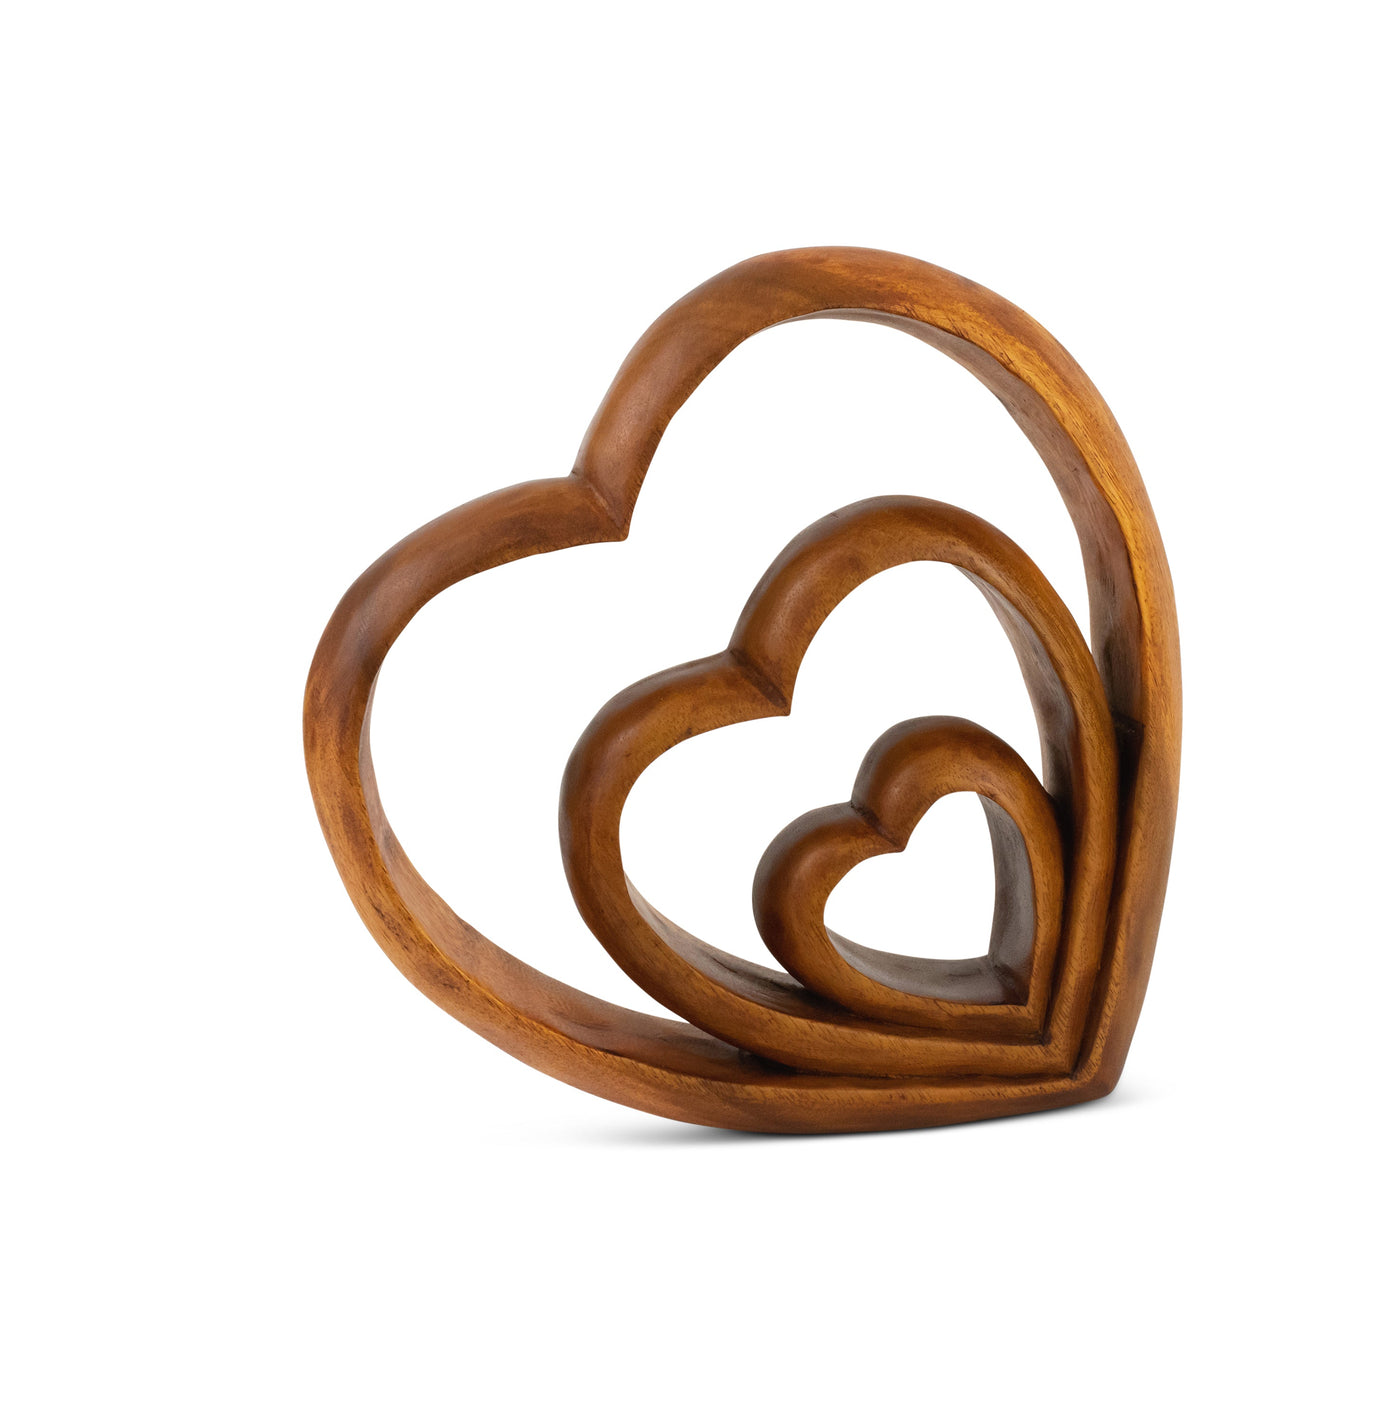 Wooden Handmade Abstract Sculpture Statue Handcrafted "Hearts of Love" Gift Art Decorative Home Decor Figurine Accent Decoration Artwork Hand Carved